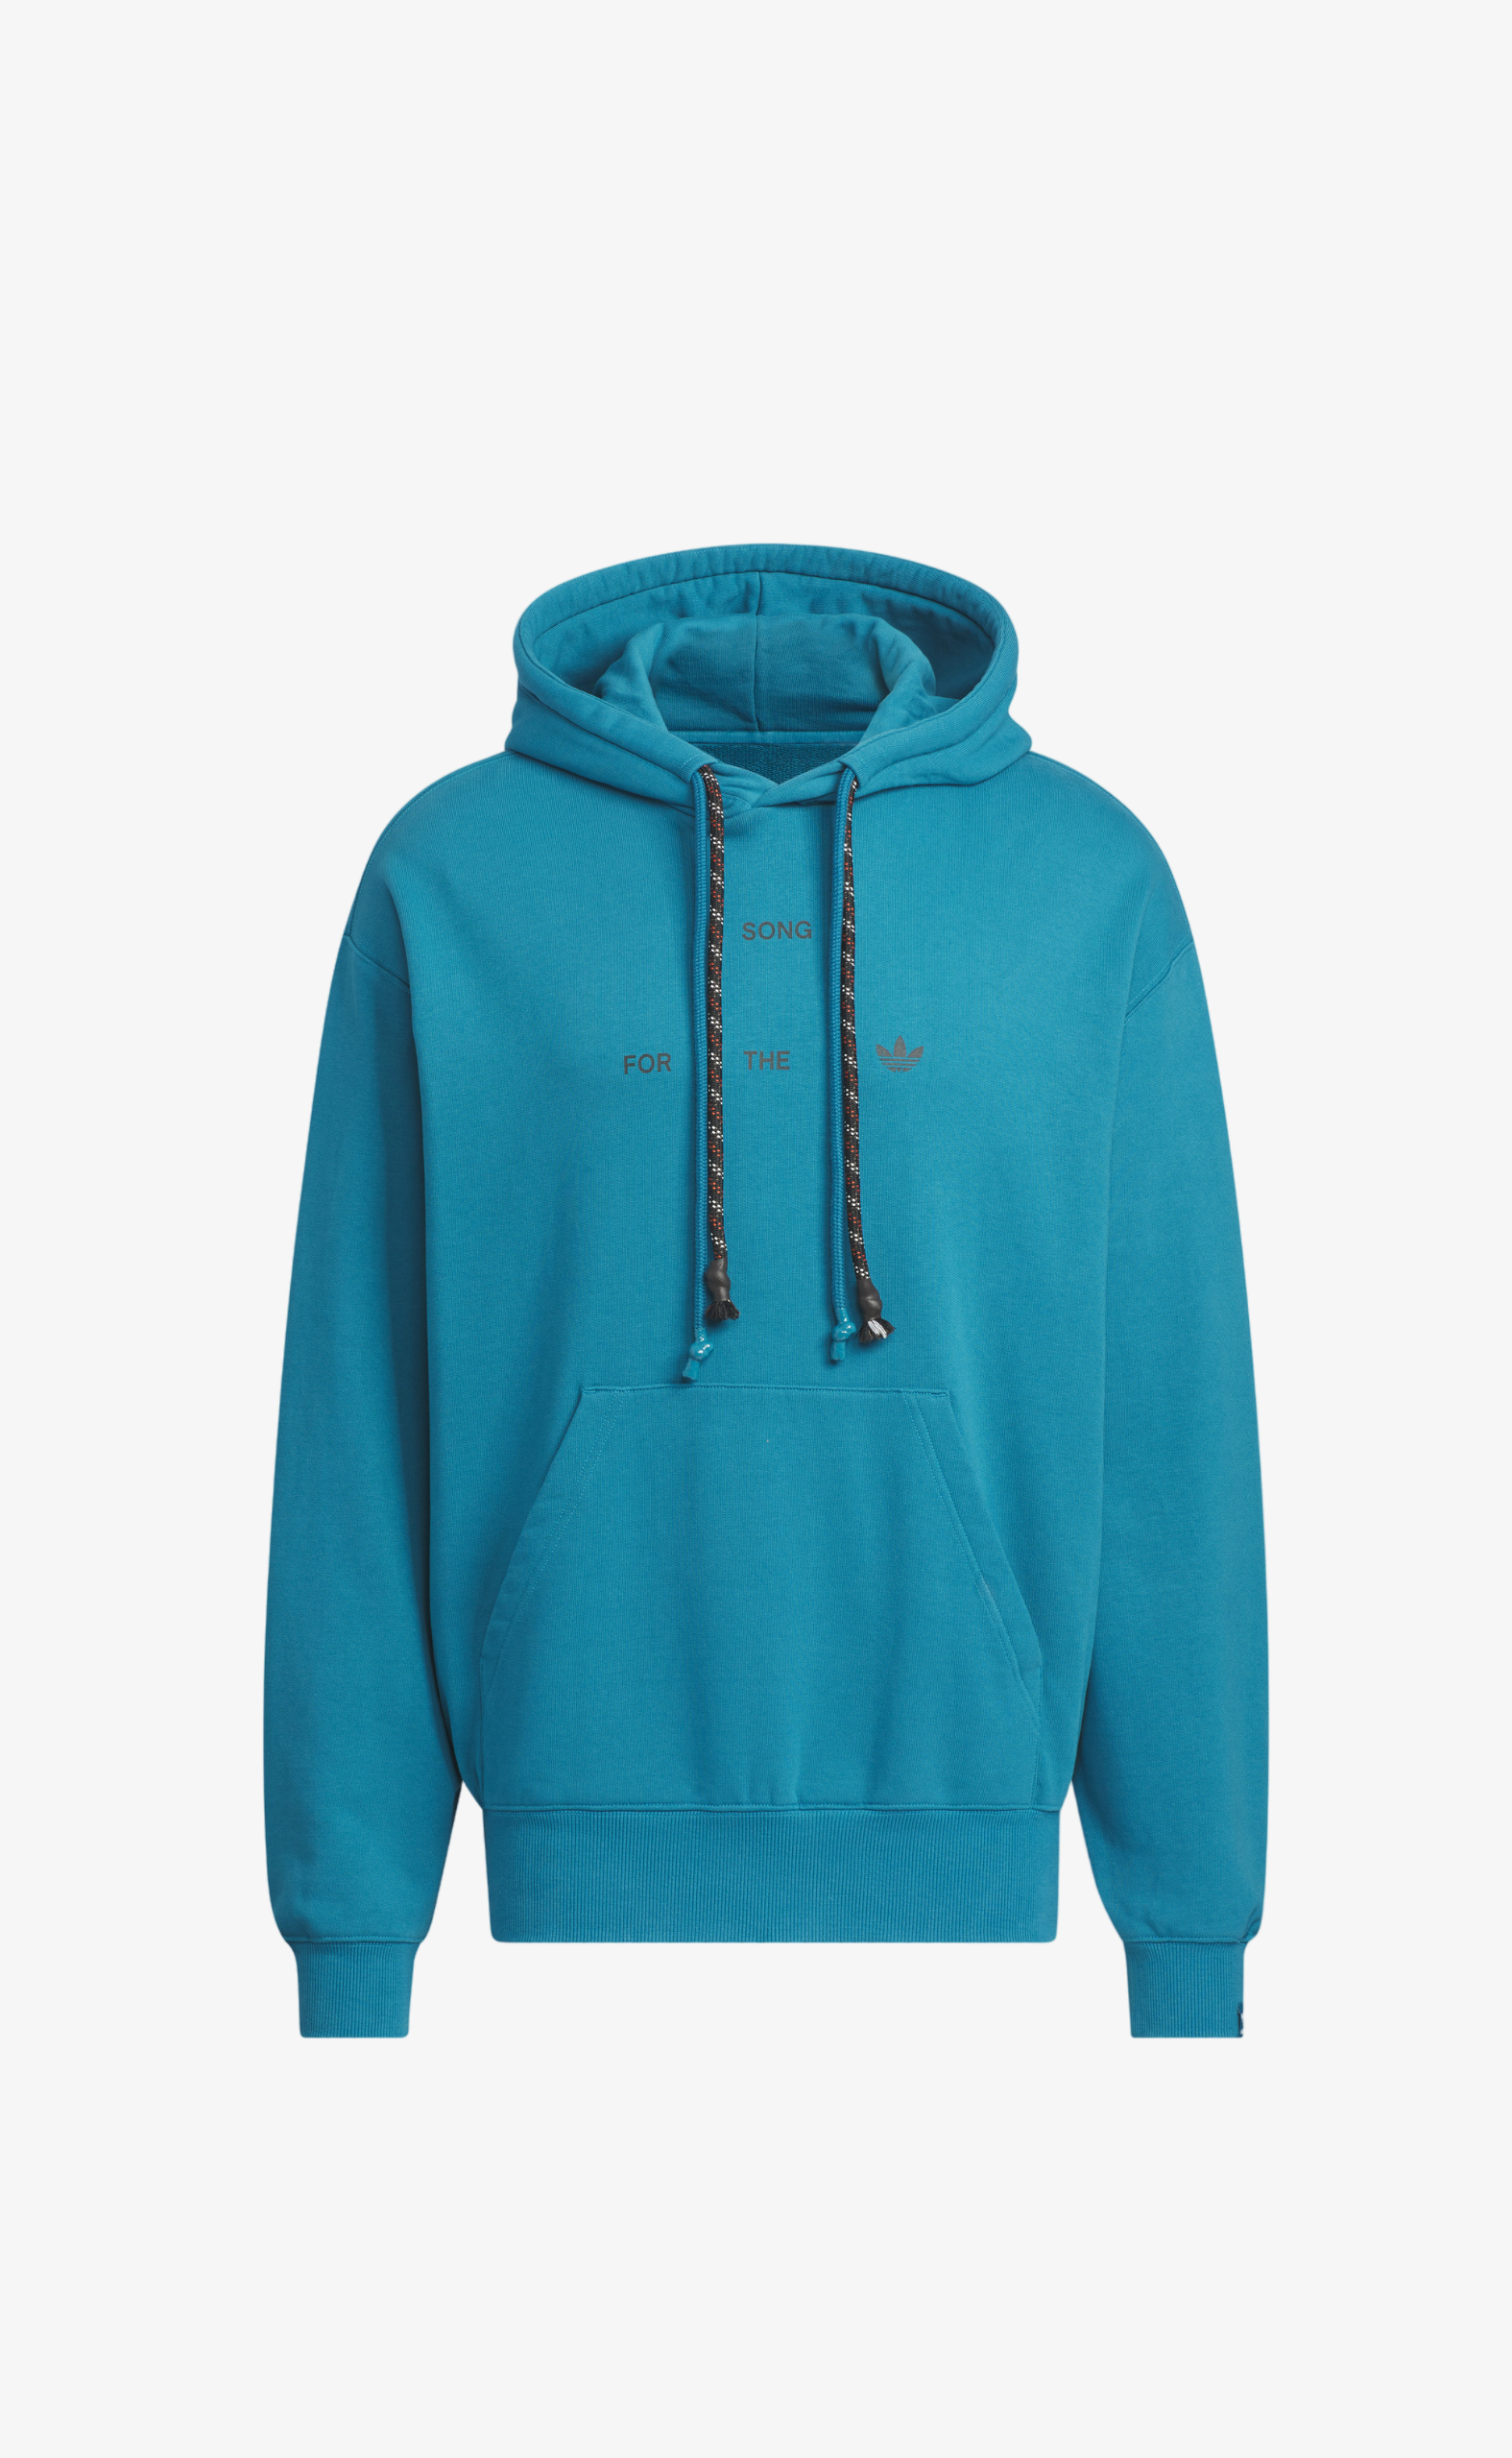 SONG FOR THE MUTE WINTER TURQUOISE HOODIE